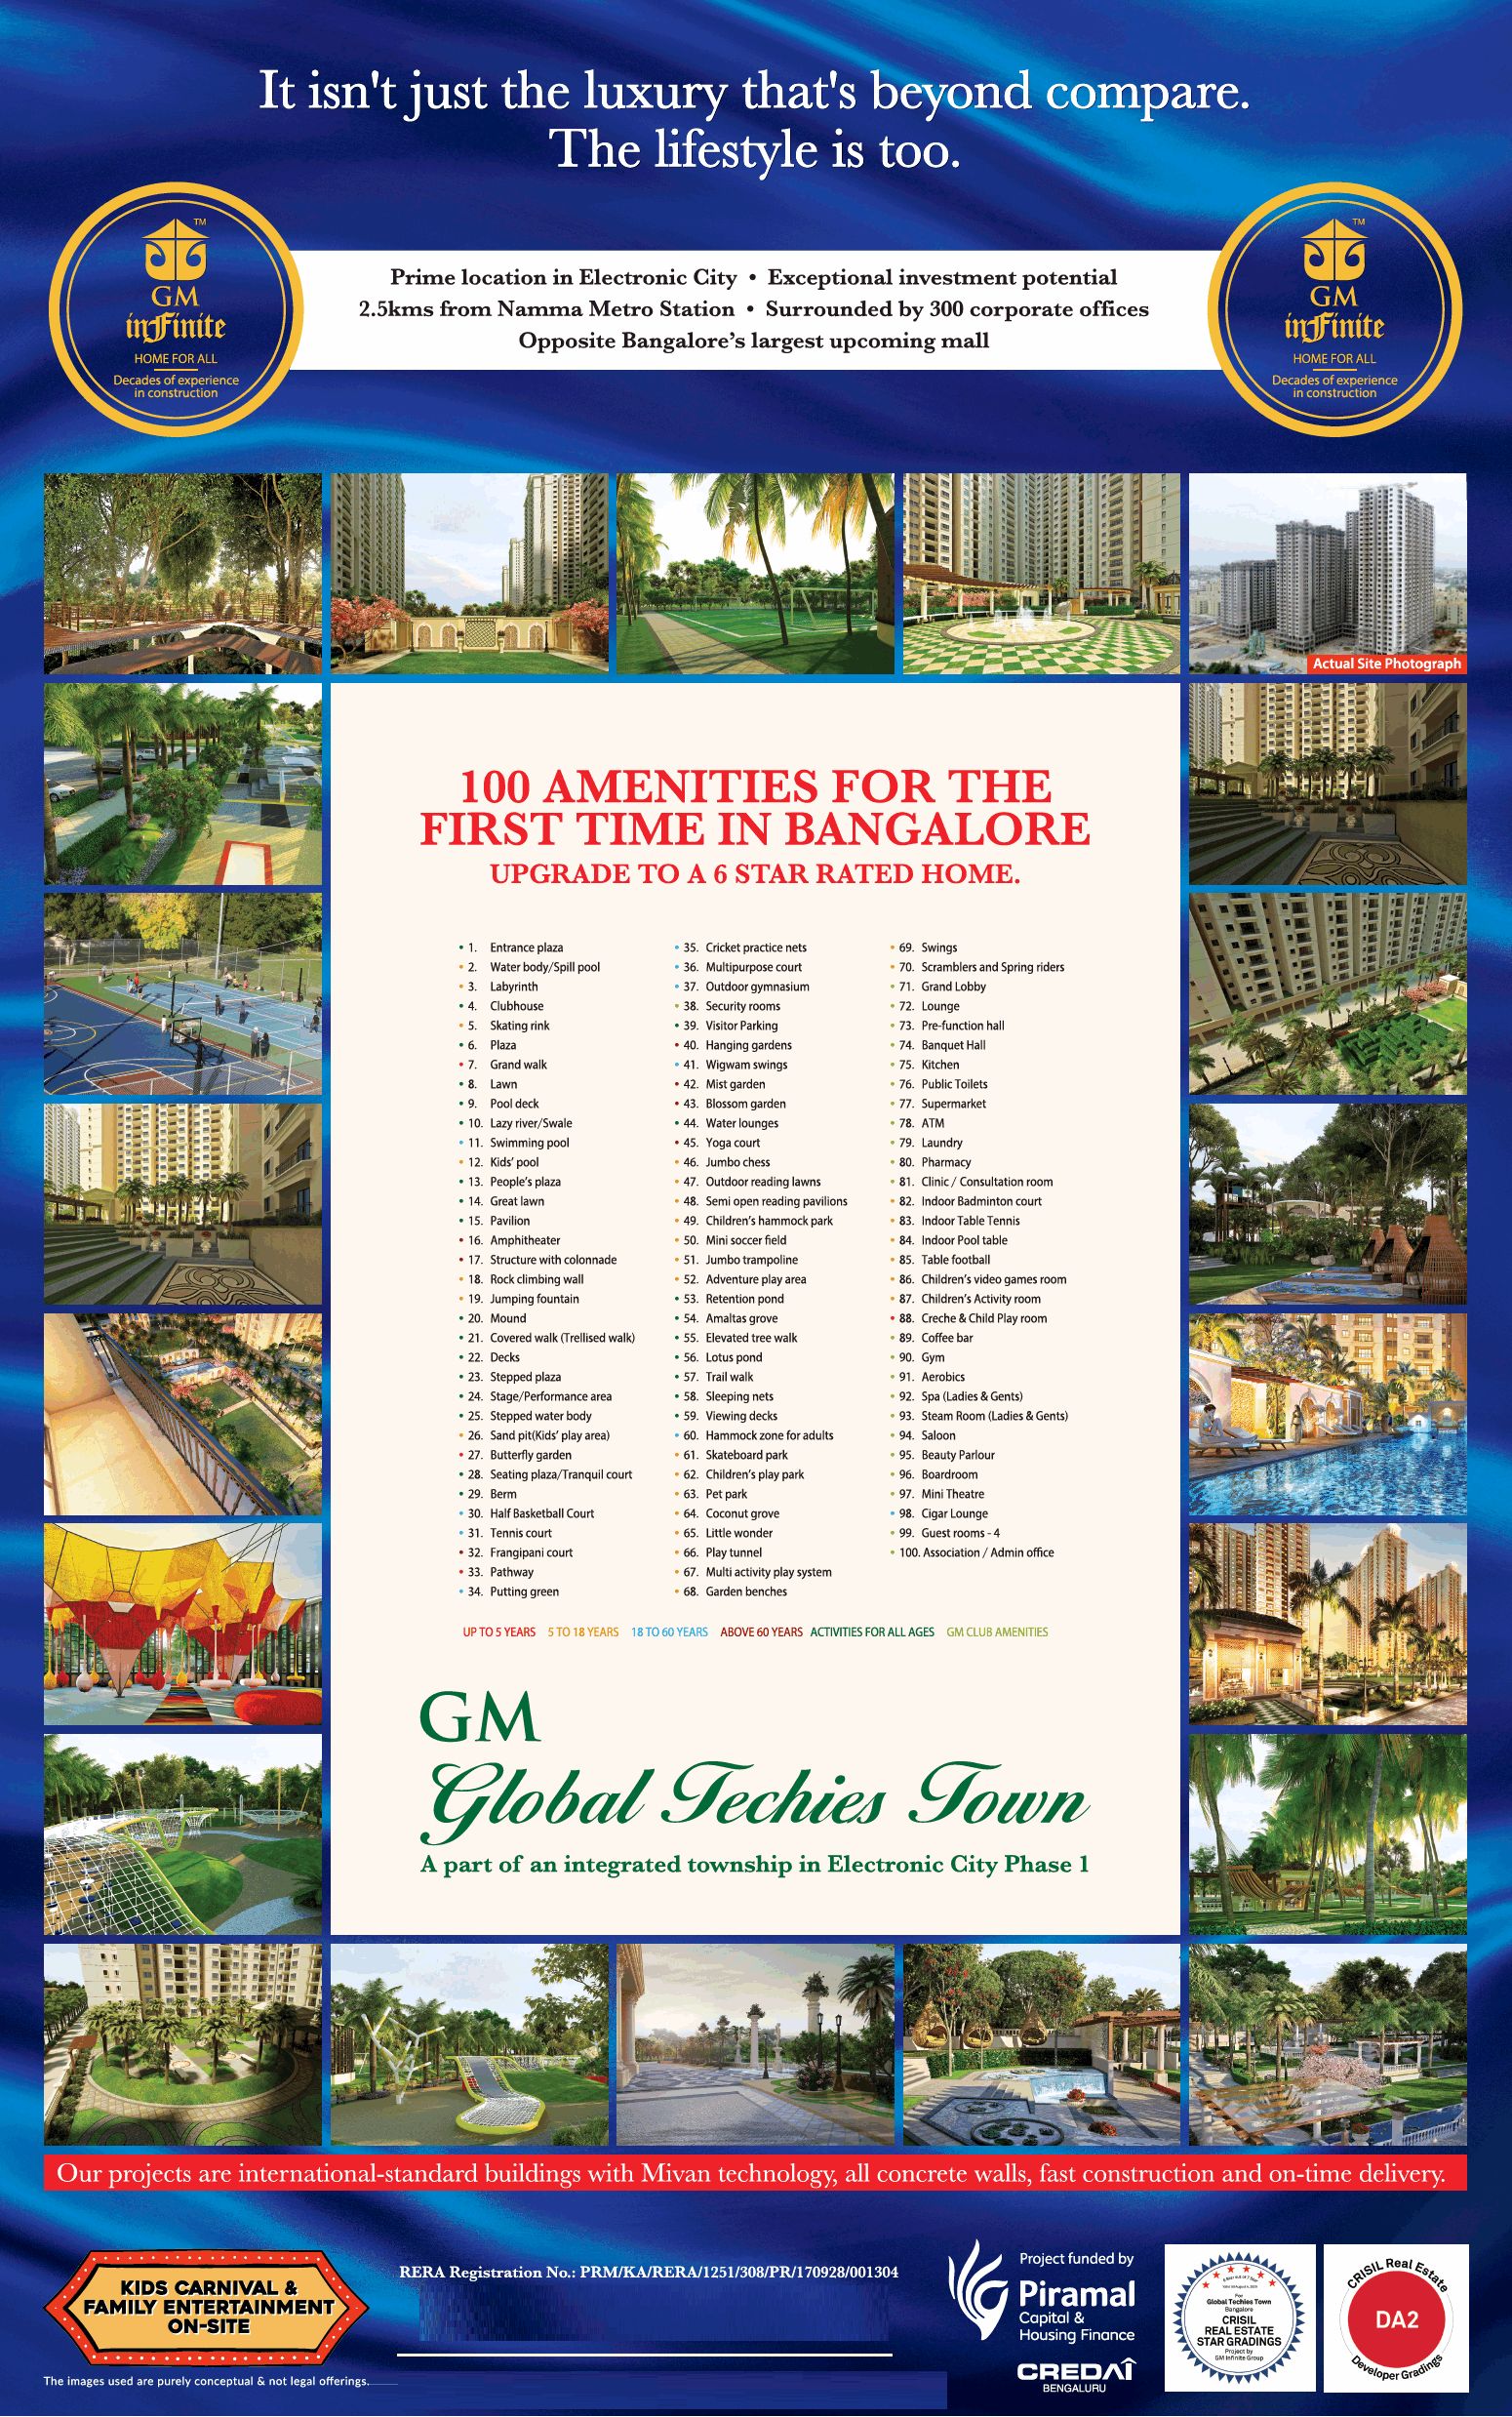 GM Global Techies Town 100 amenities for the first time in Bangalore